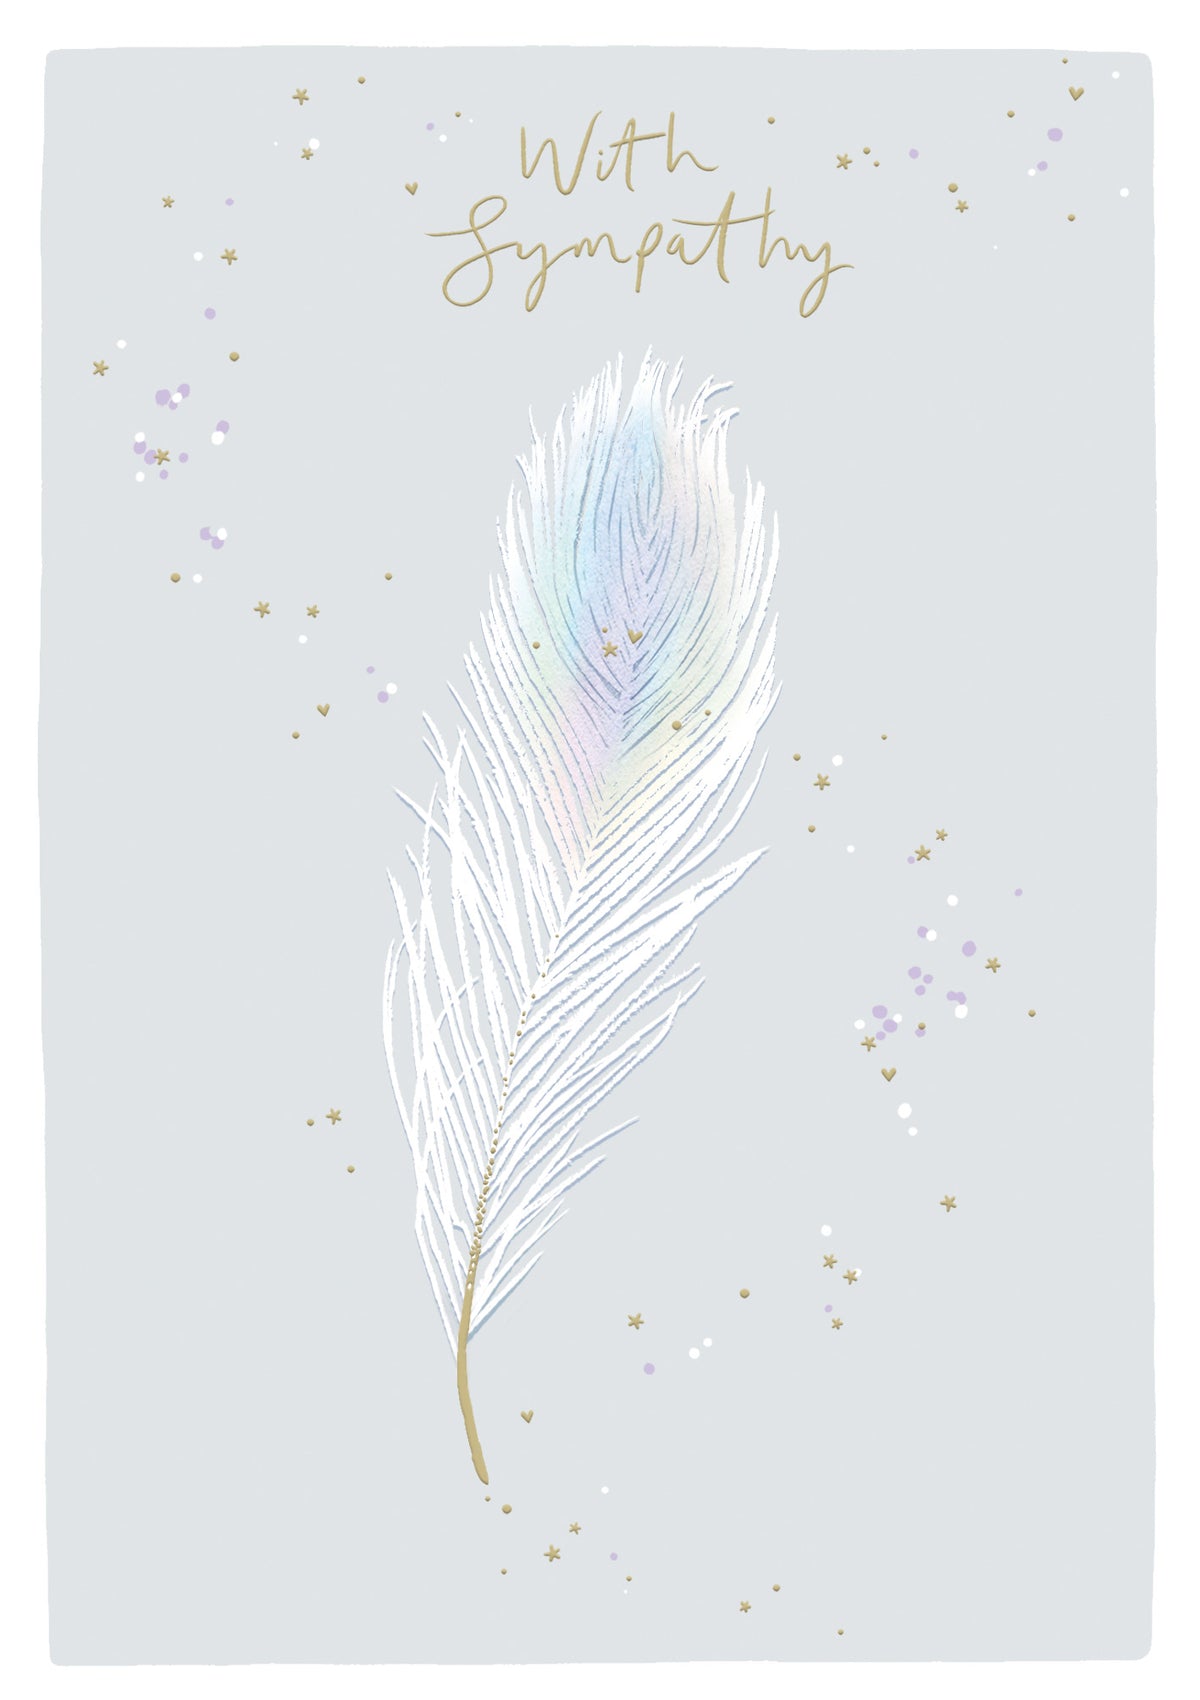 Holo Feather Sympathy Card from Penny Black